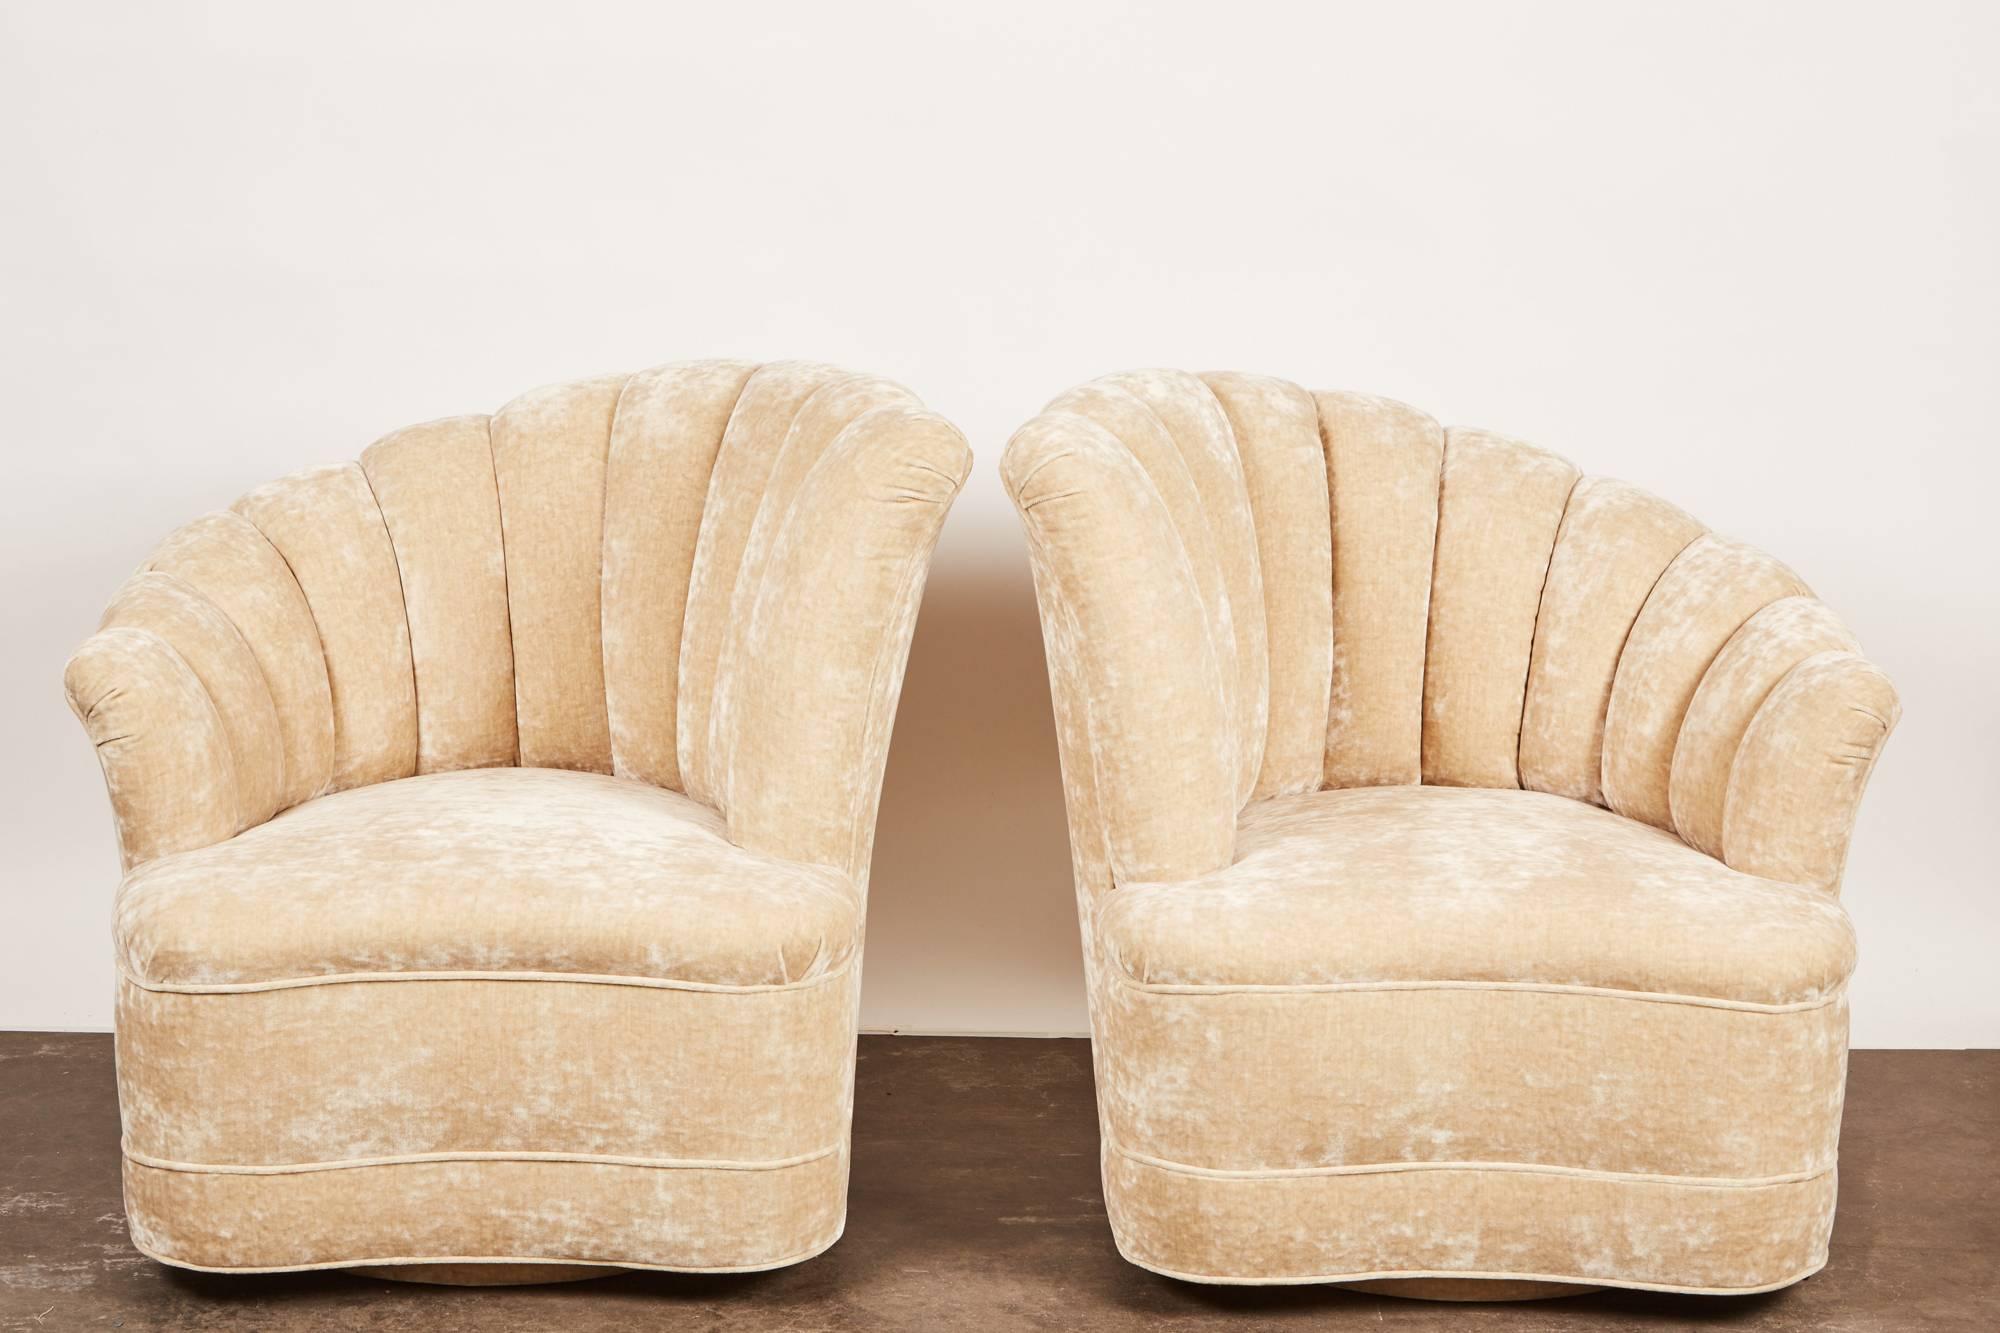 A pair of newly upholstered club chairs, inspired by the Nautilus marine mollusk while maintaining the Classic Art Deco style.